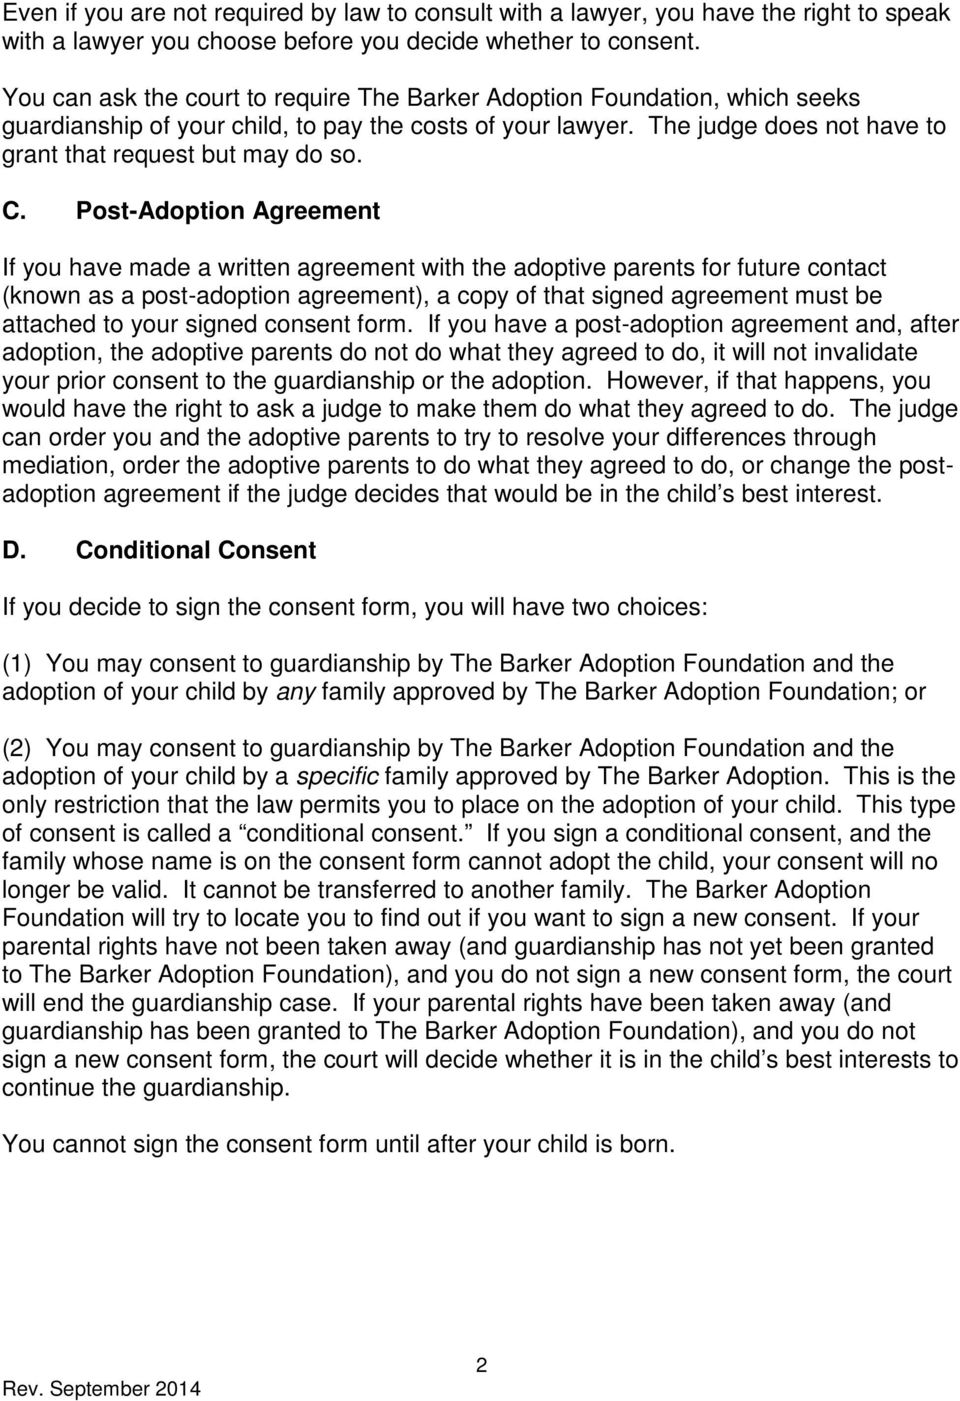 C. Post-Adoption Agreement If you have made a written agreement with the adoptive parents for future contact (known as a post-adoption agreement), a copy of that signed agreement must be attached to